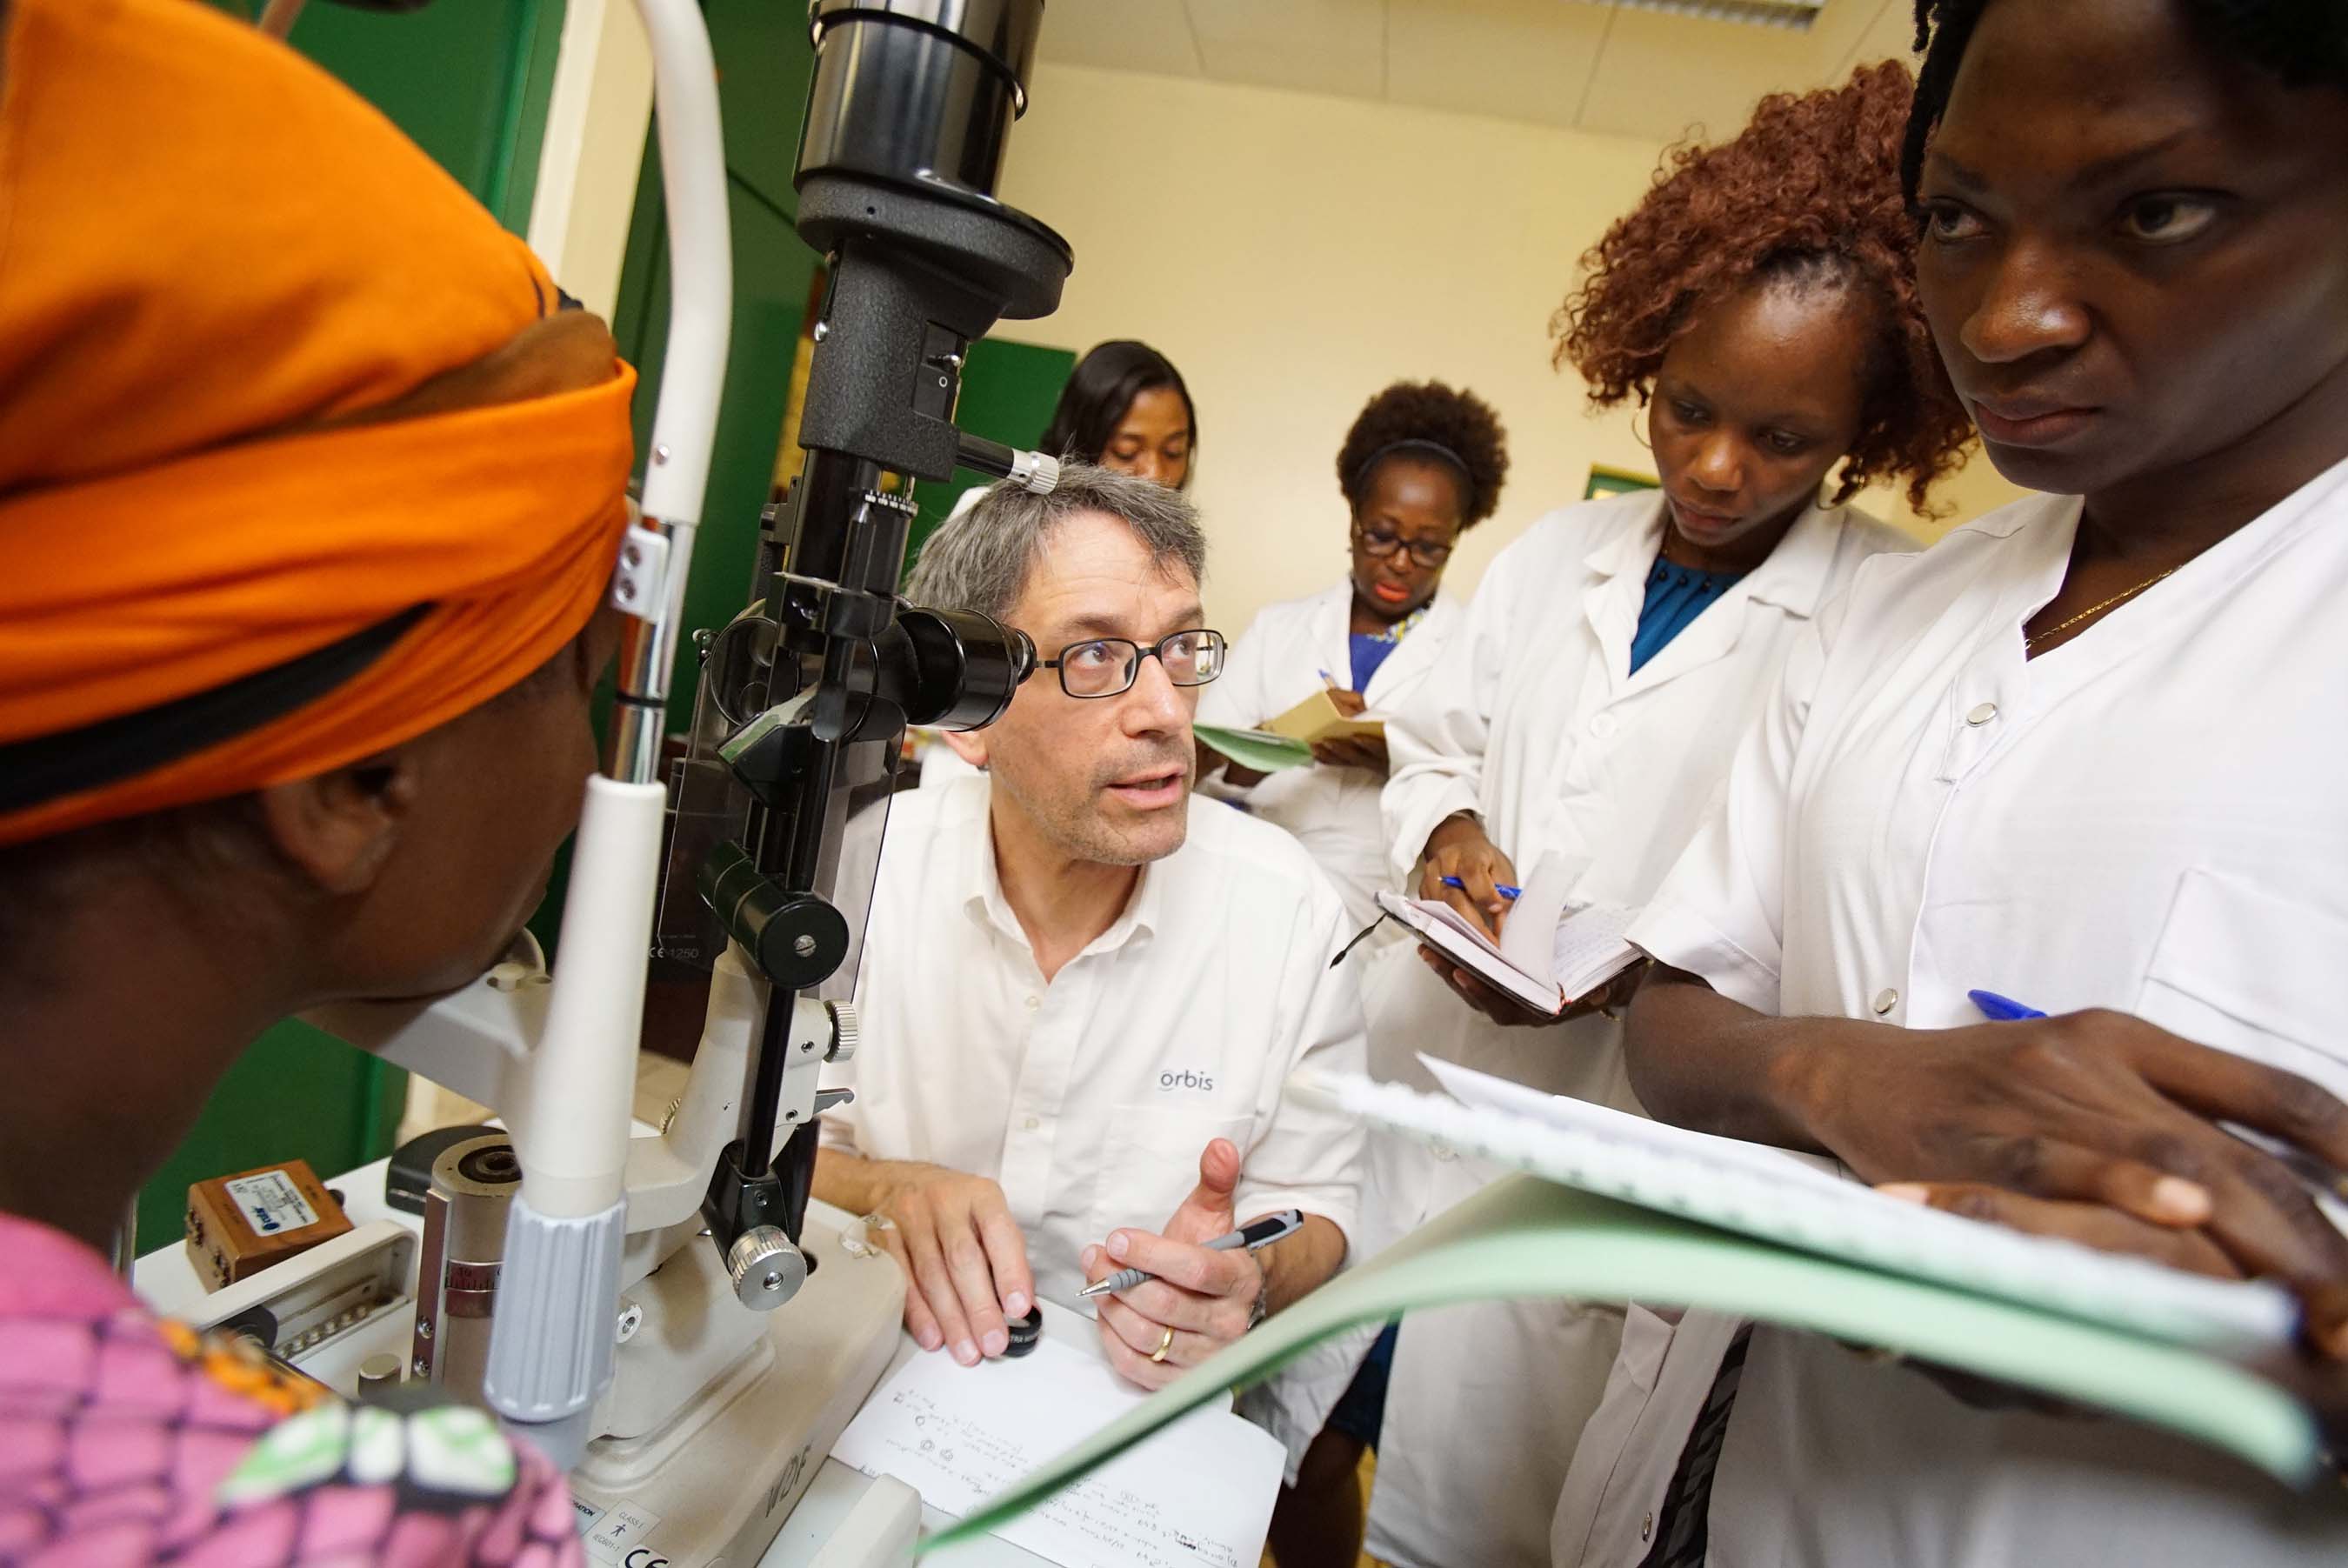 Volunteer Faculty Dr. Mark Lesk trains local doctors on glaucoma screening in Yaound, Cameroon (2016).